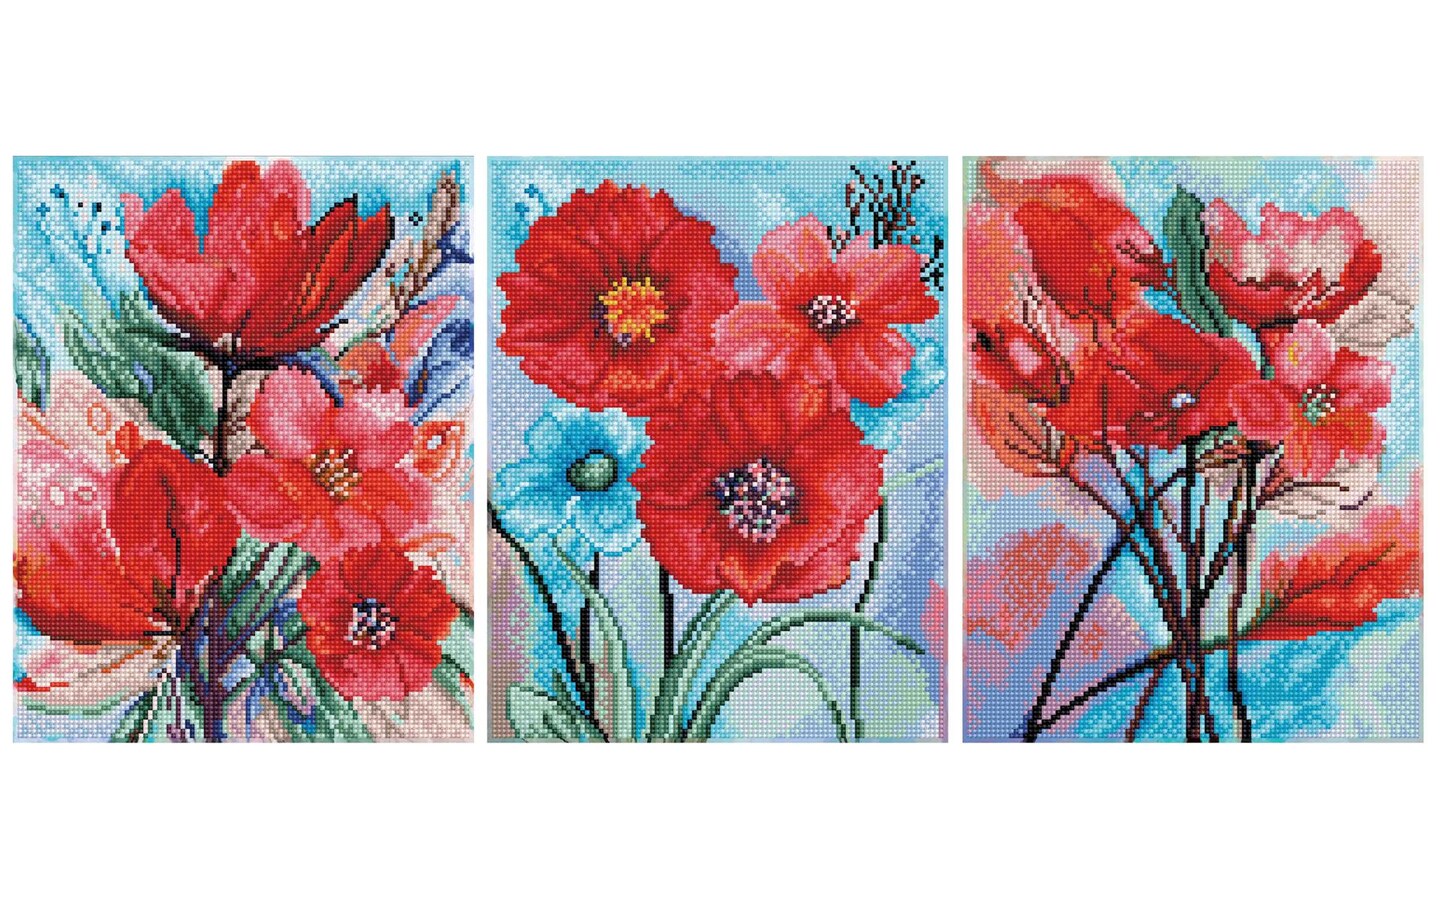 DIAMOND ART BY LEISURE ARTS Diamond Painting Kits For Adults 11x14  Advanced Triptych Red Poppies, Set of 3, Full Drill, Diamond Art Kits,  Dimond Art, Diamond Art for Adults